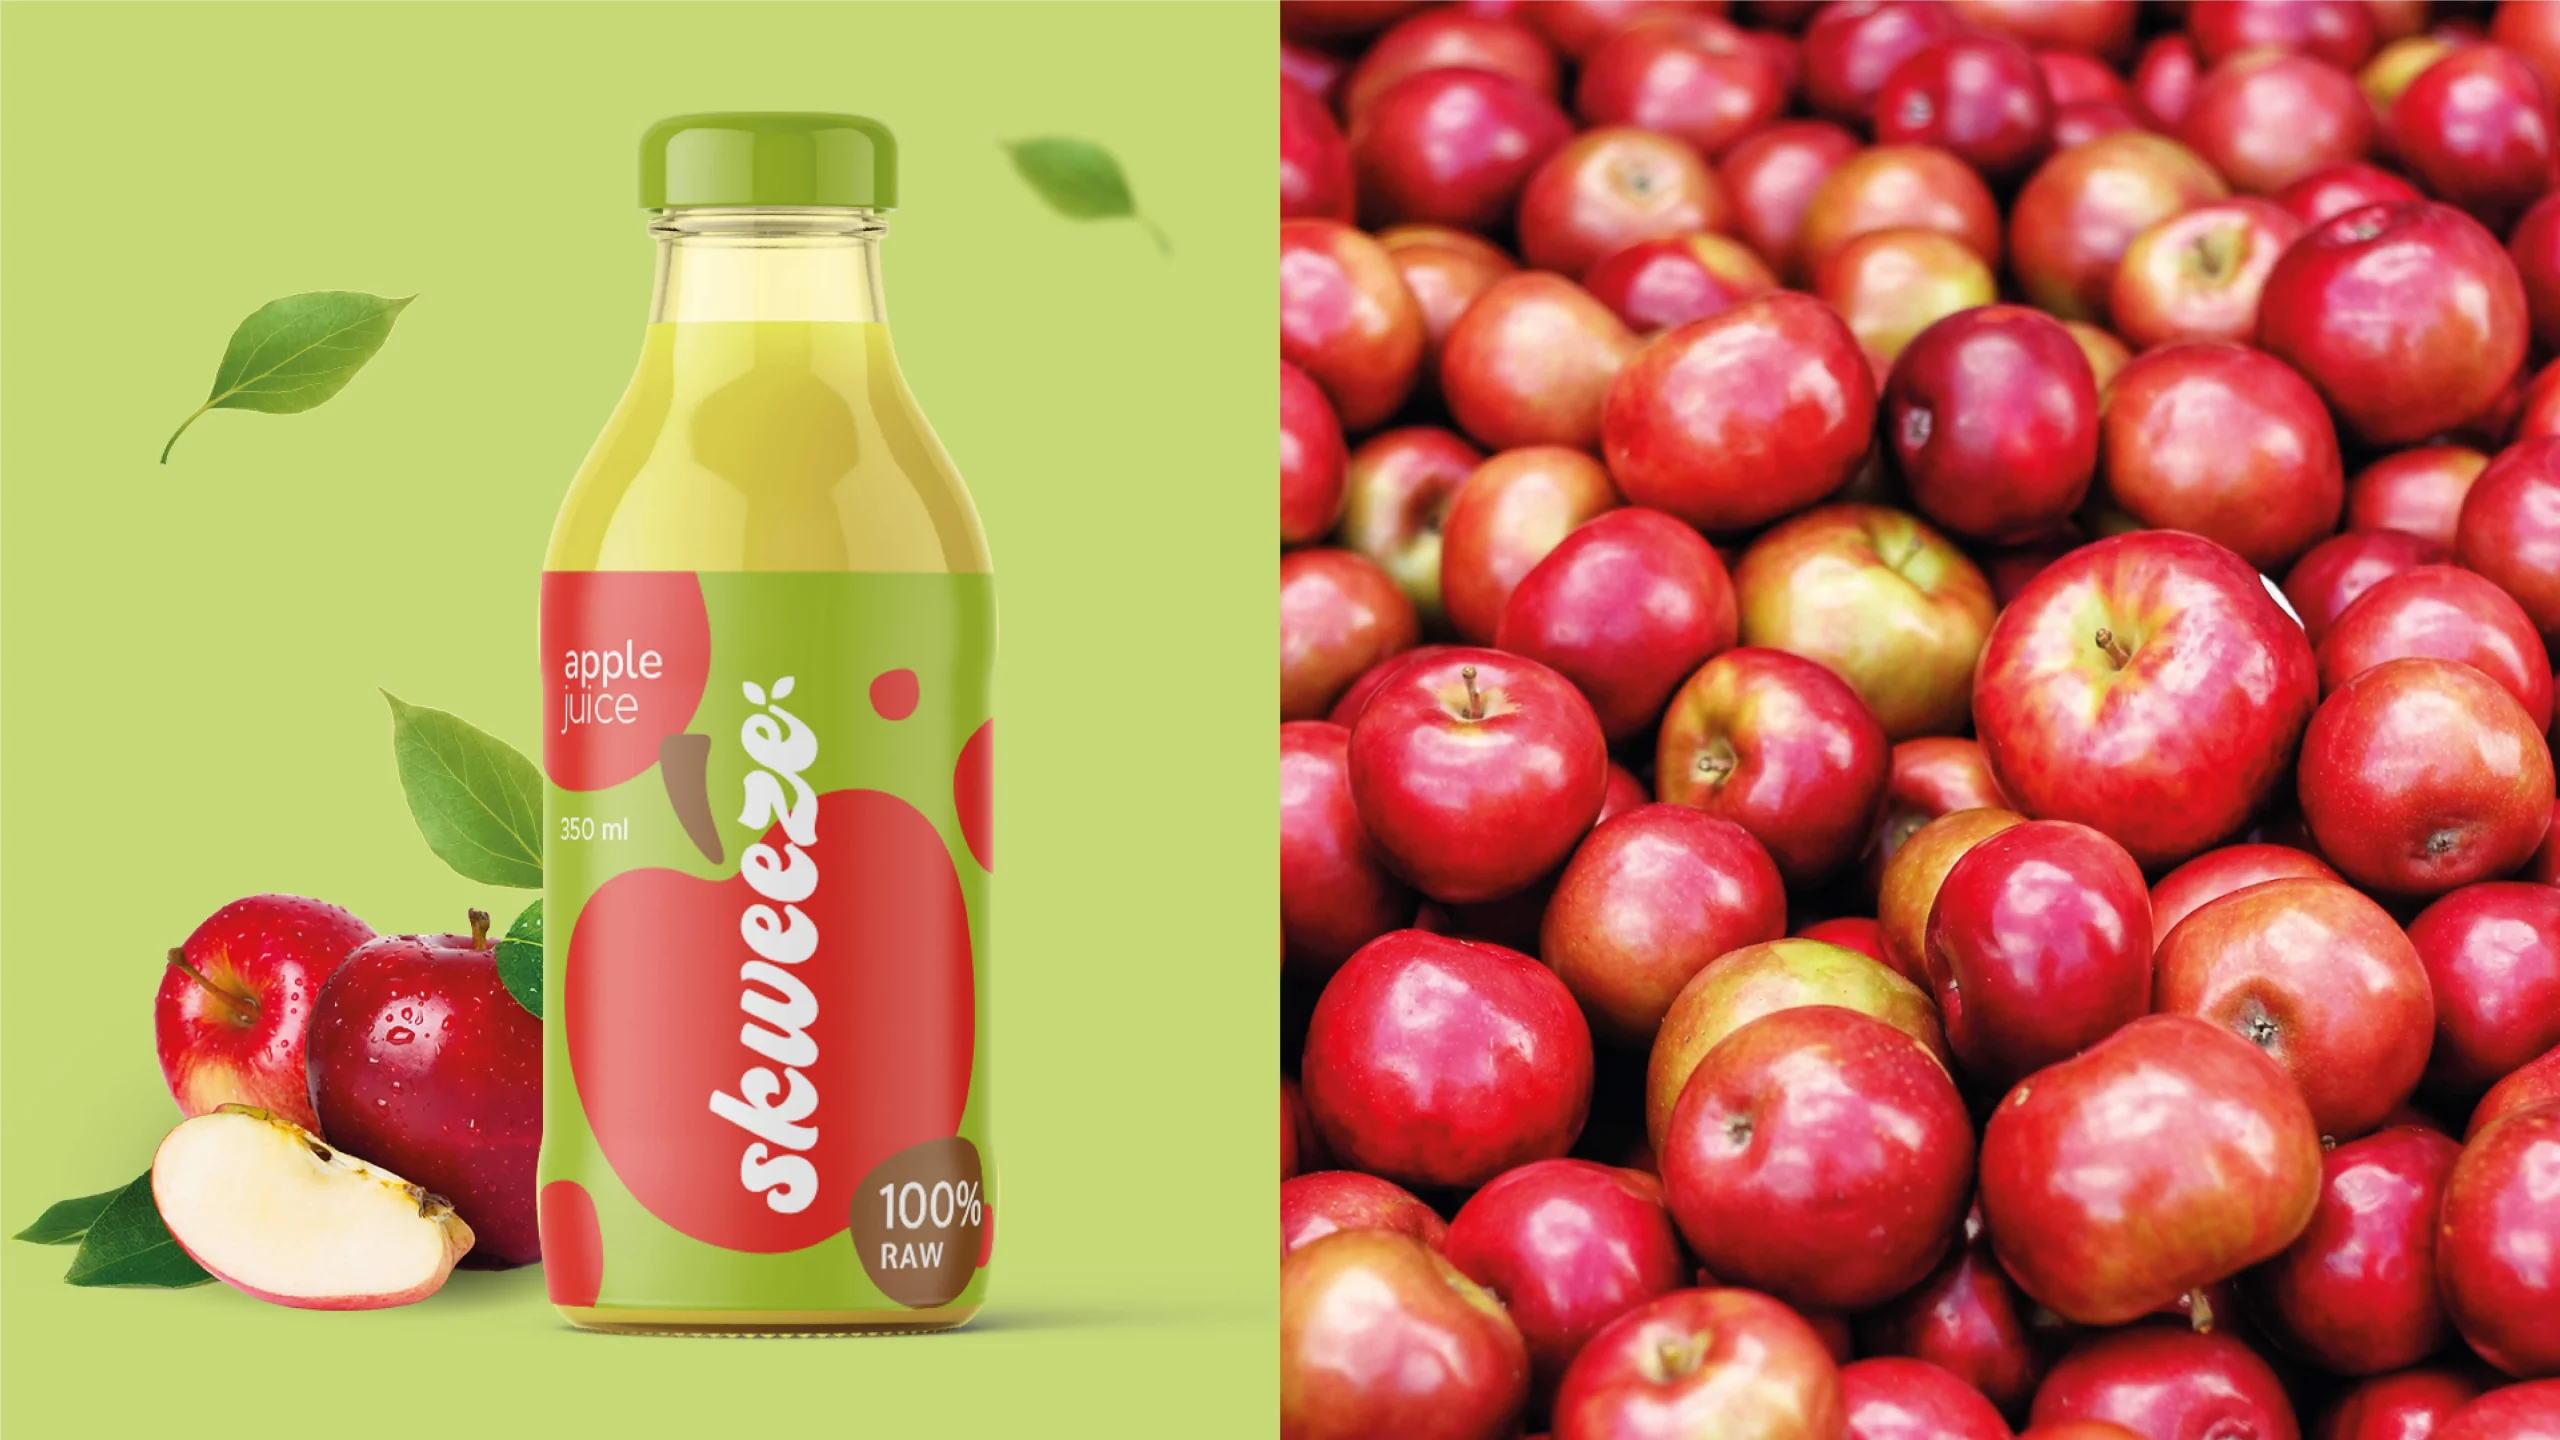 A bottle of apple juice next to a bunch of apples.